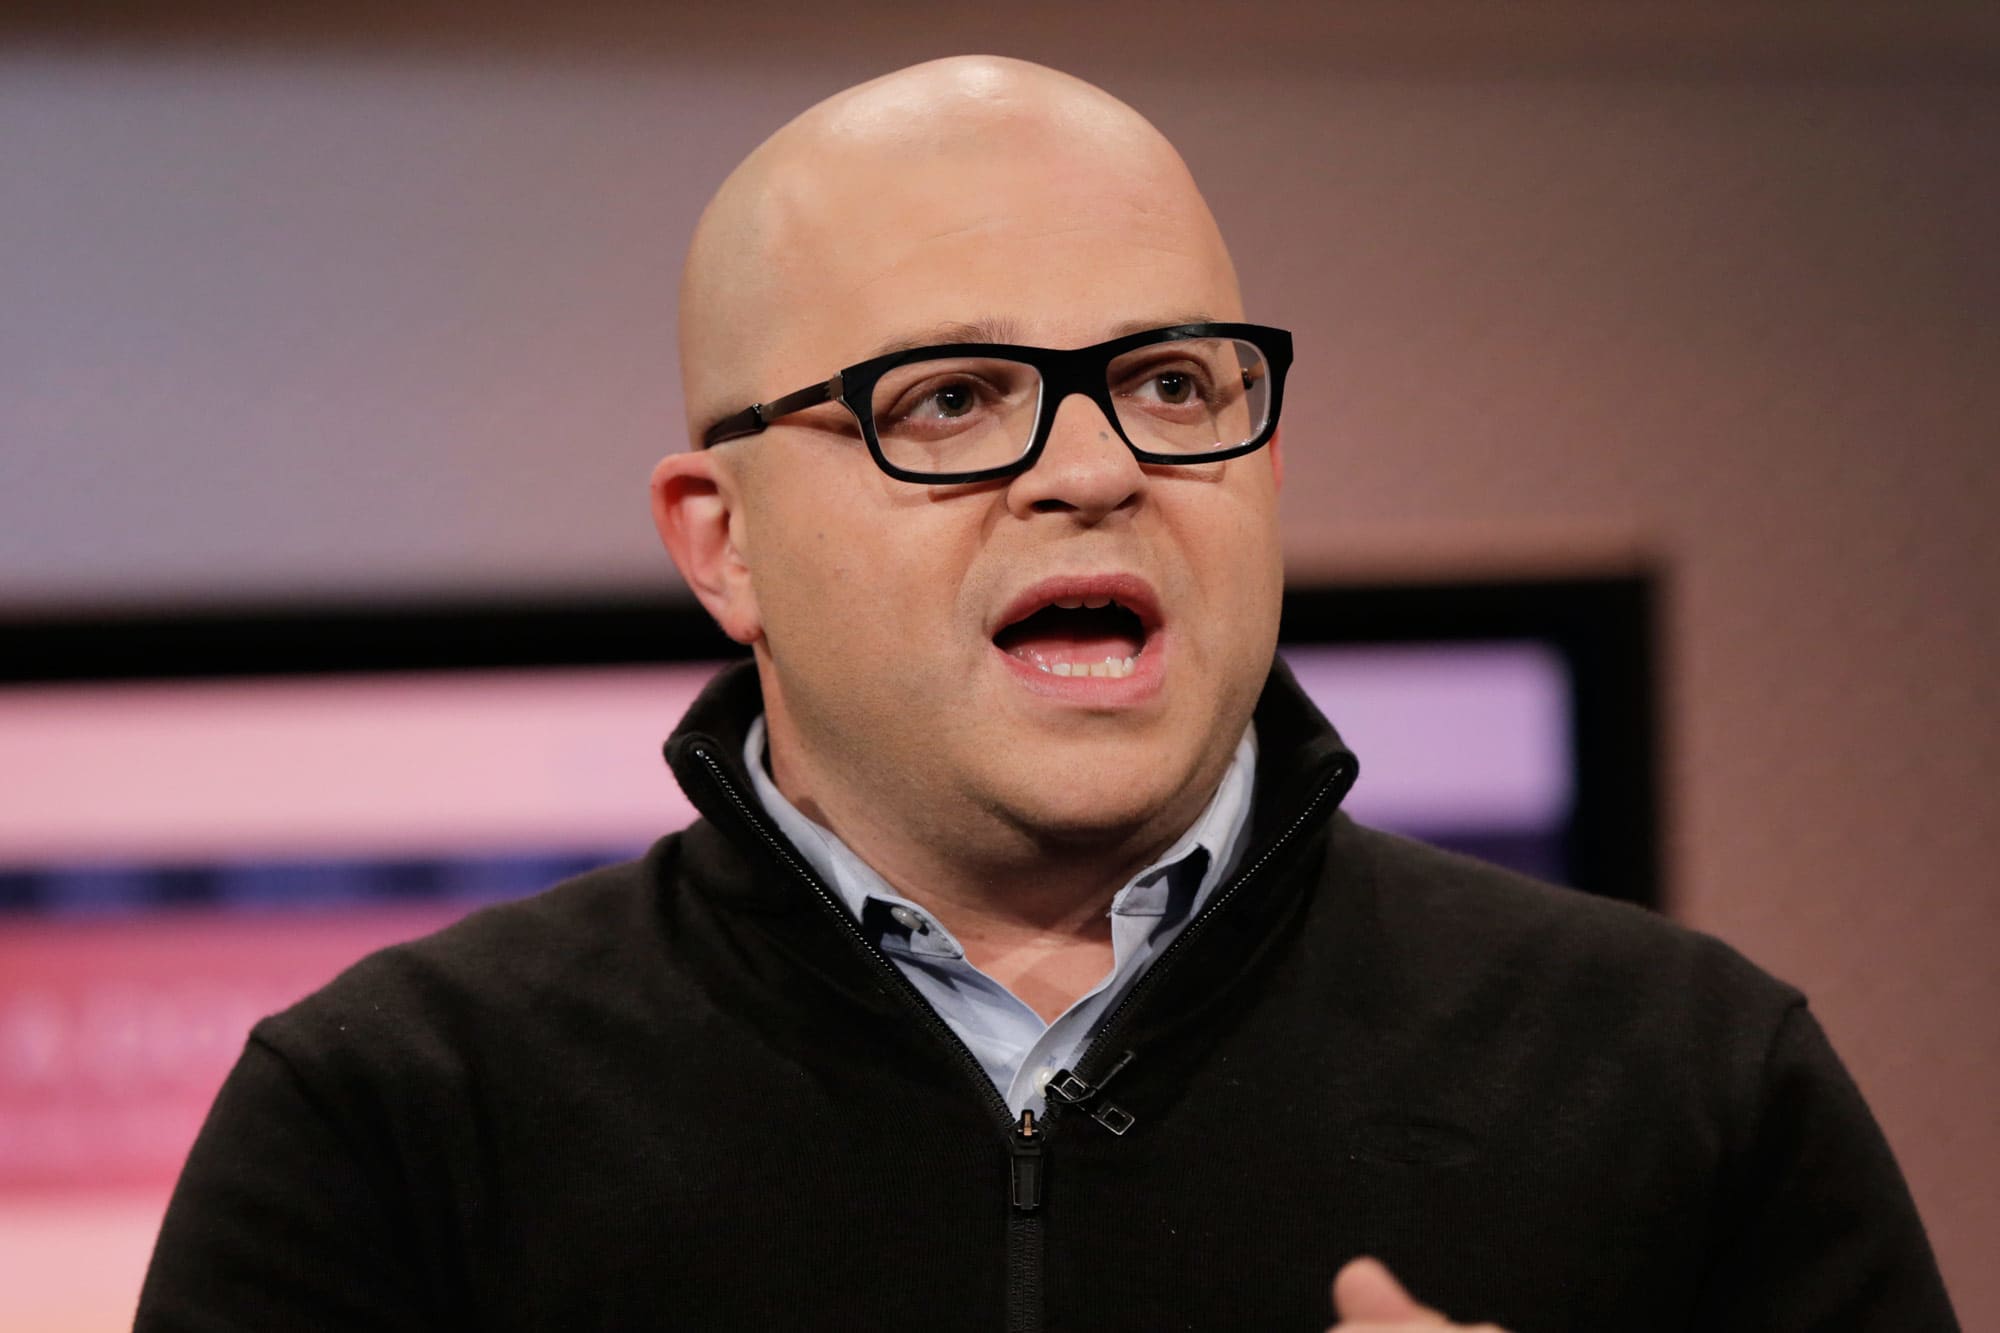 Twilio (TWLO) earnings for the fourth quarter of 2020